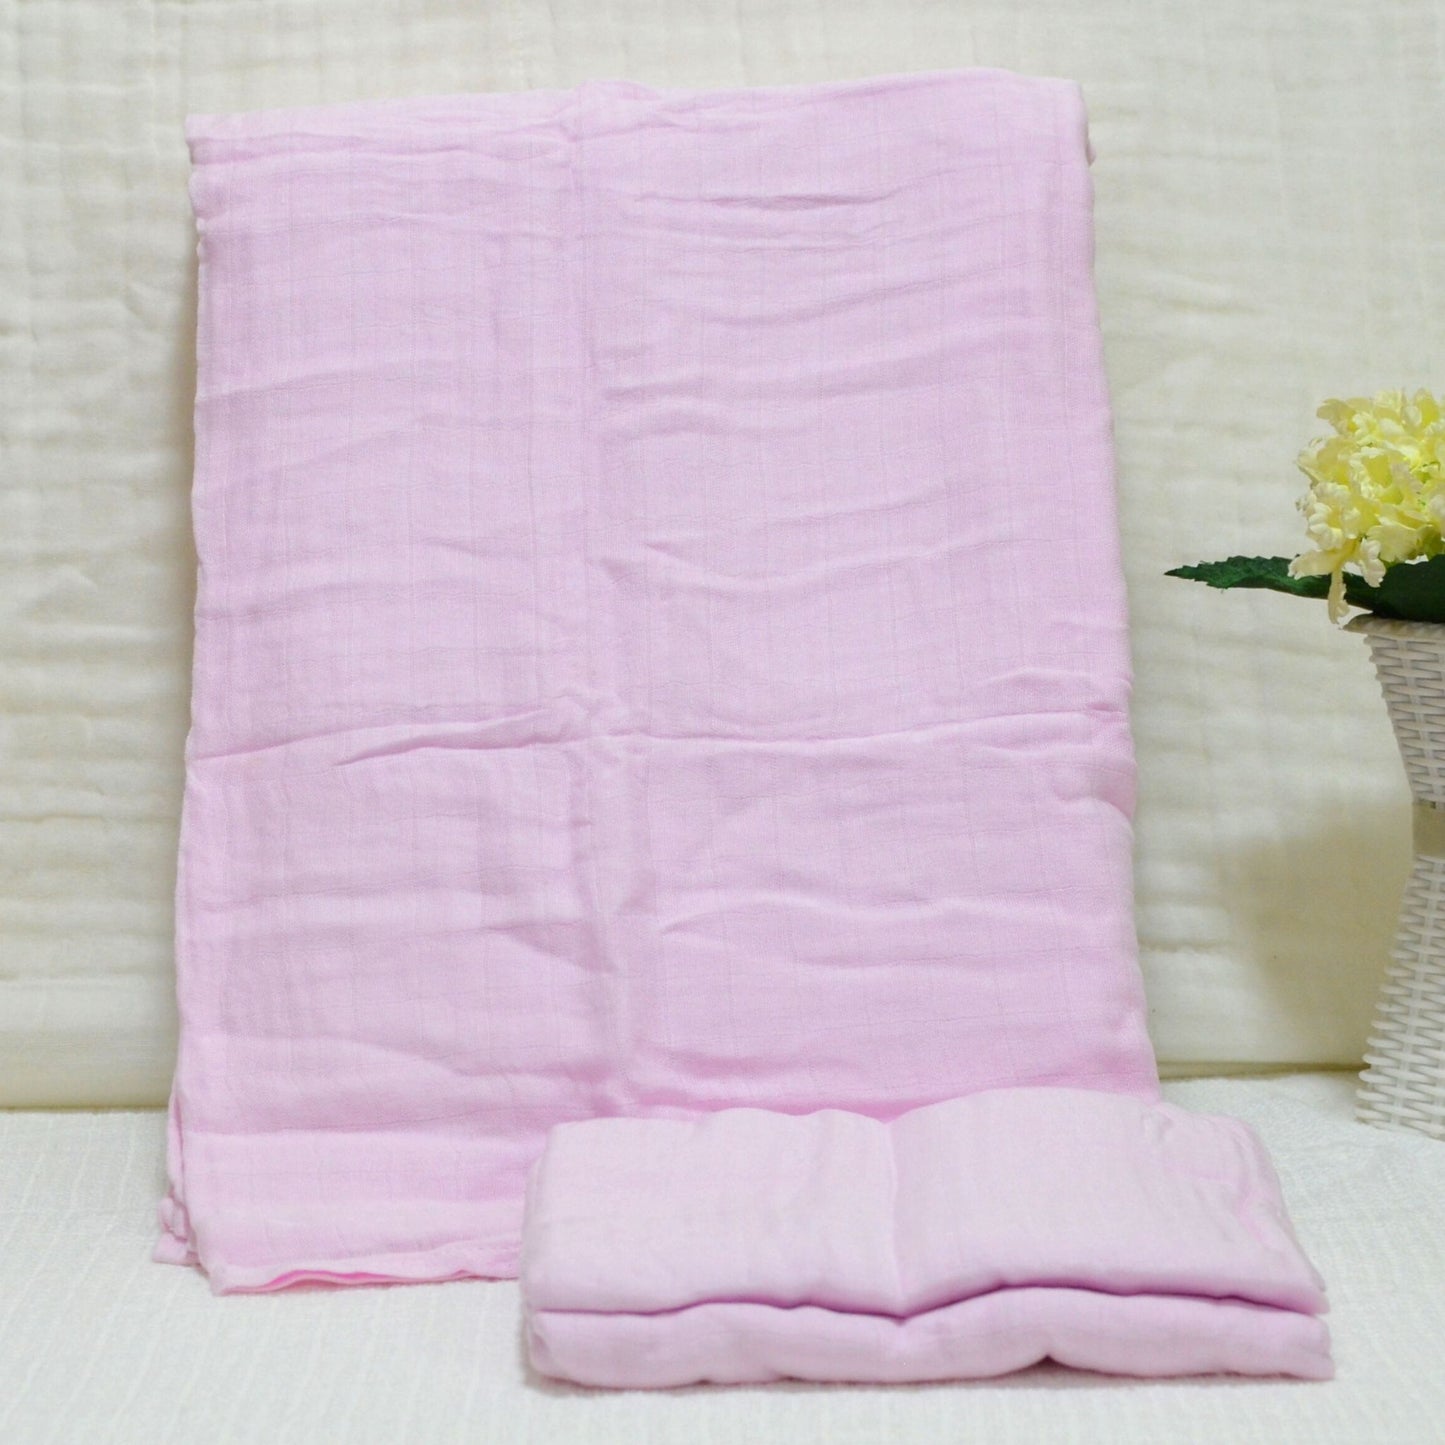 Muslin Swaddle - Pink, Blue - 70% Bamboo 30% Cotton 115x115cm